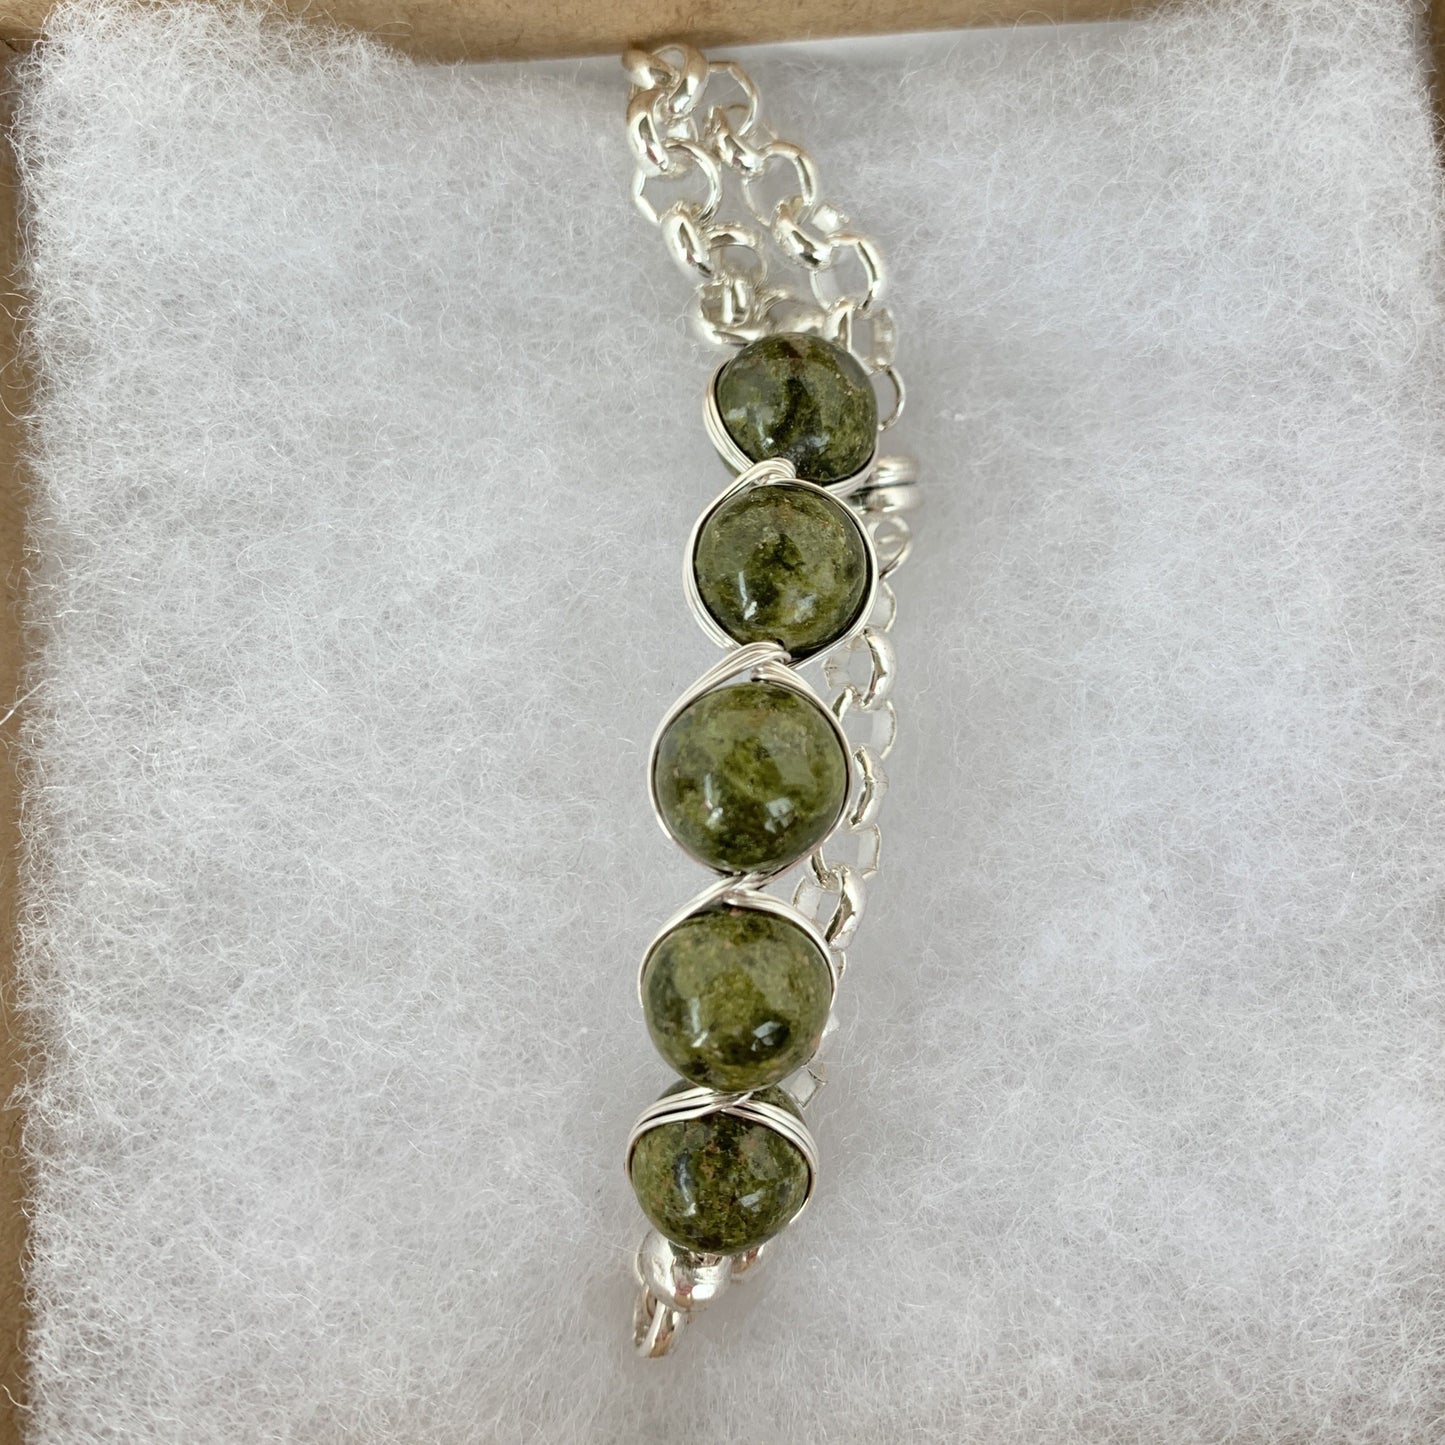 10mm unakite beads with Egyptian style sterling silver wire wrapped with silver plated on stainless steel tool chain and magnetic clasp